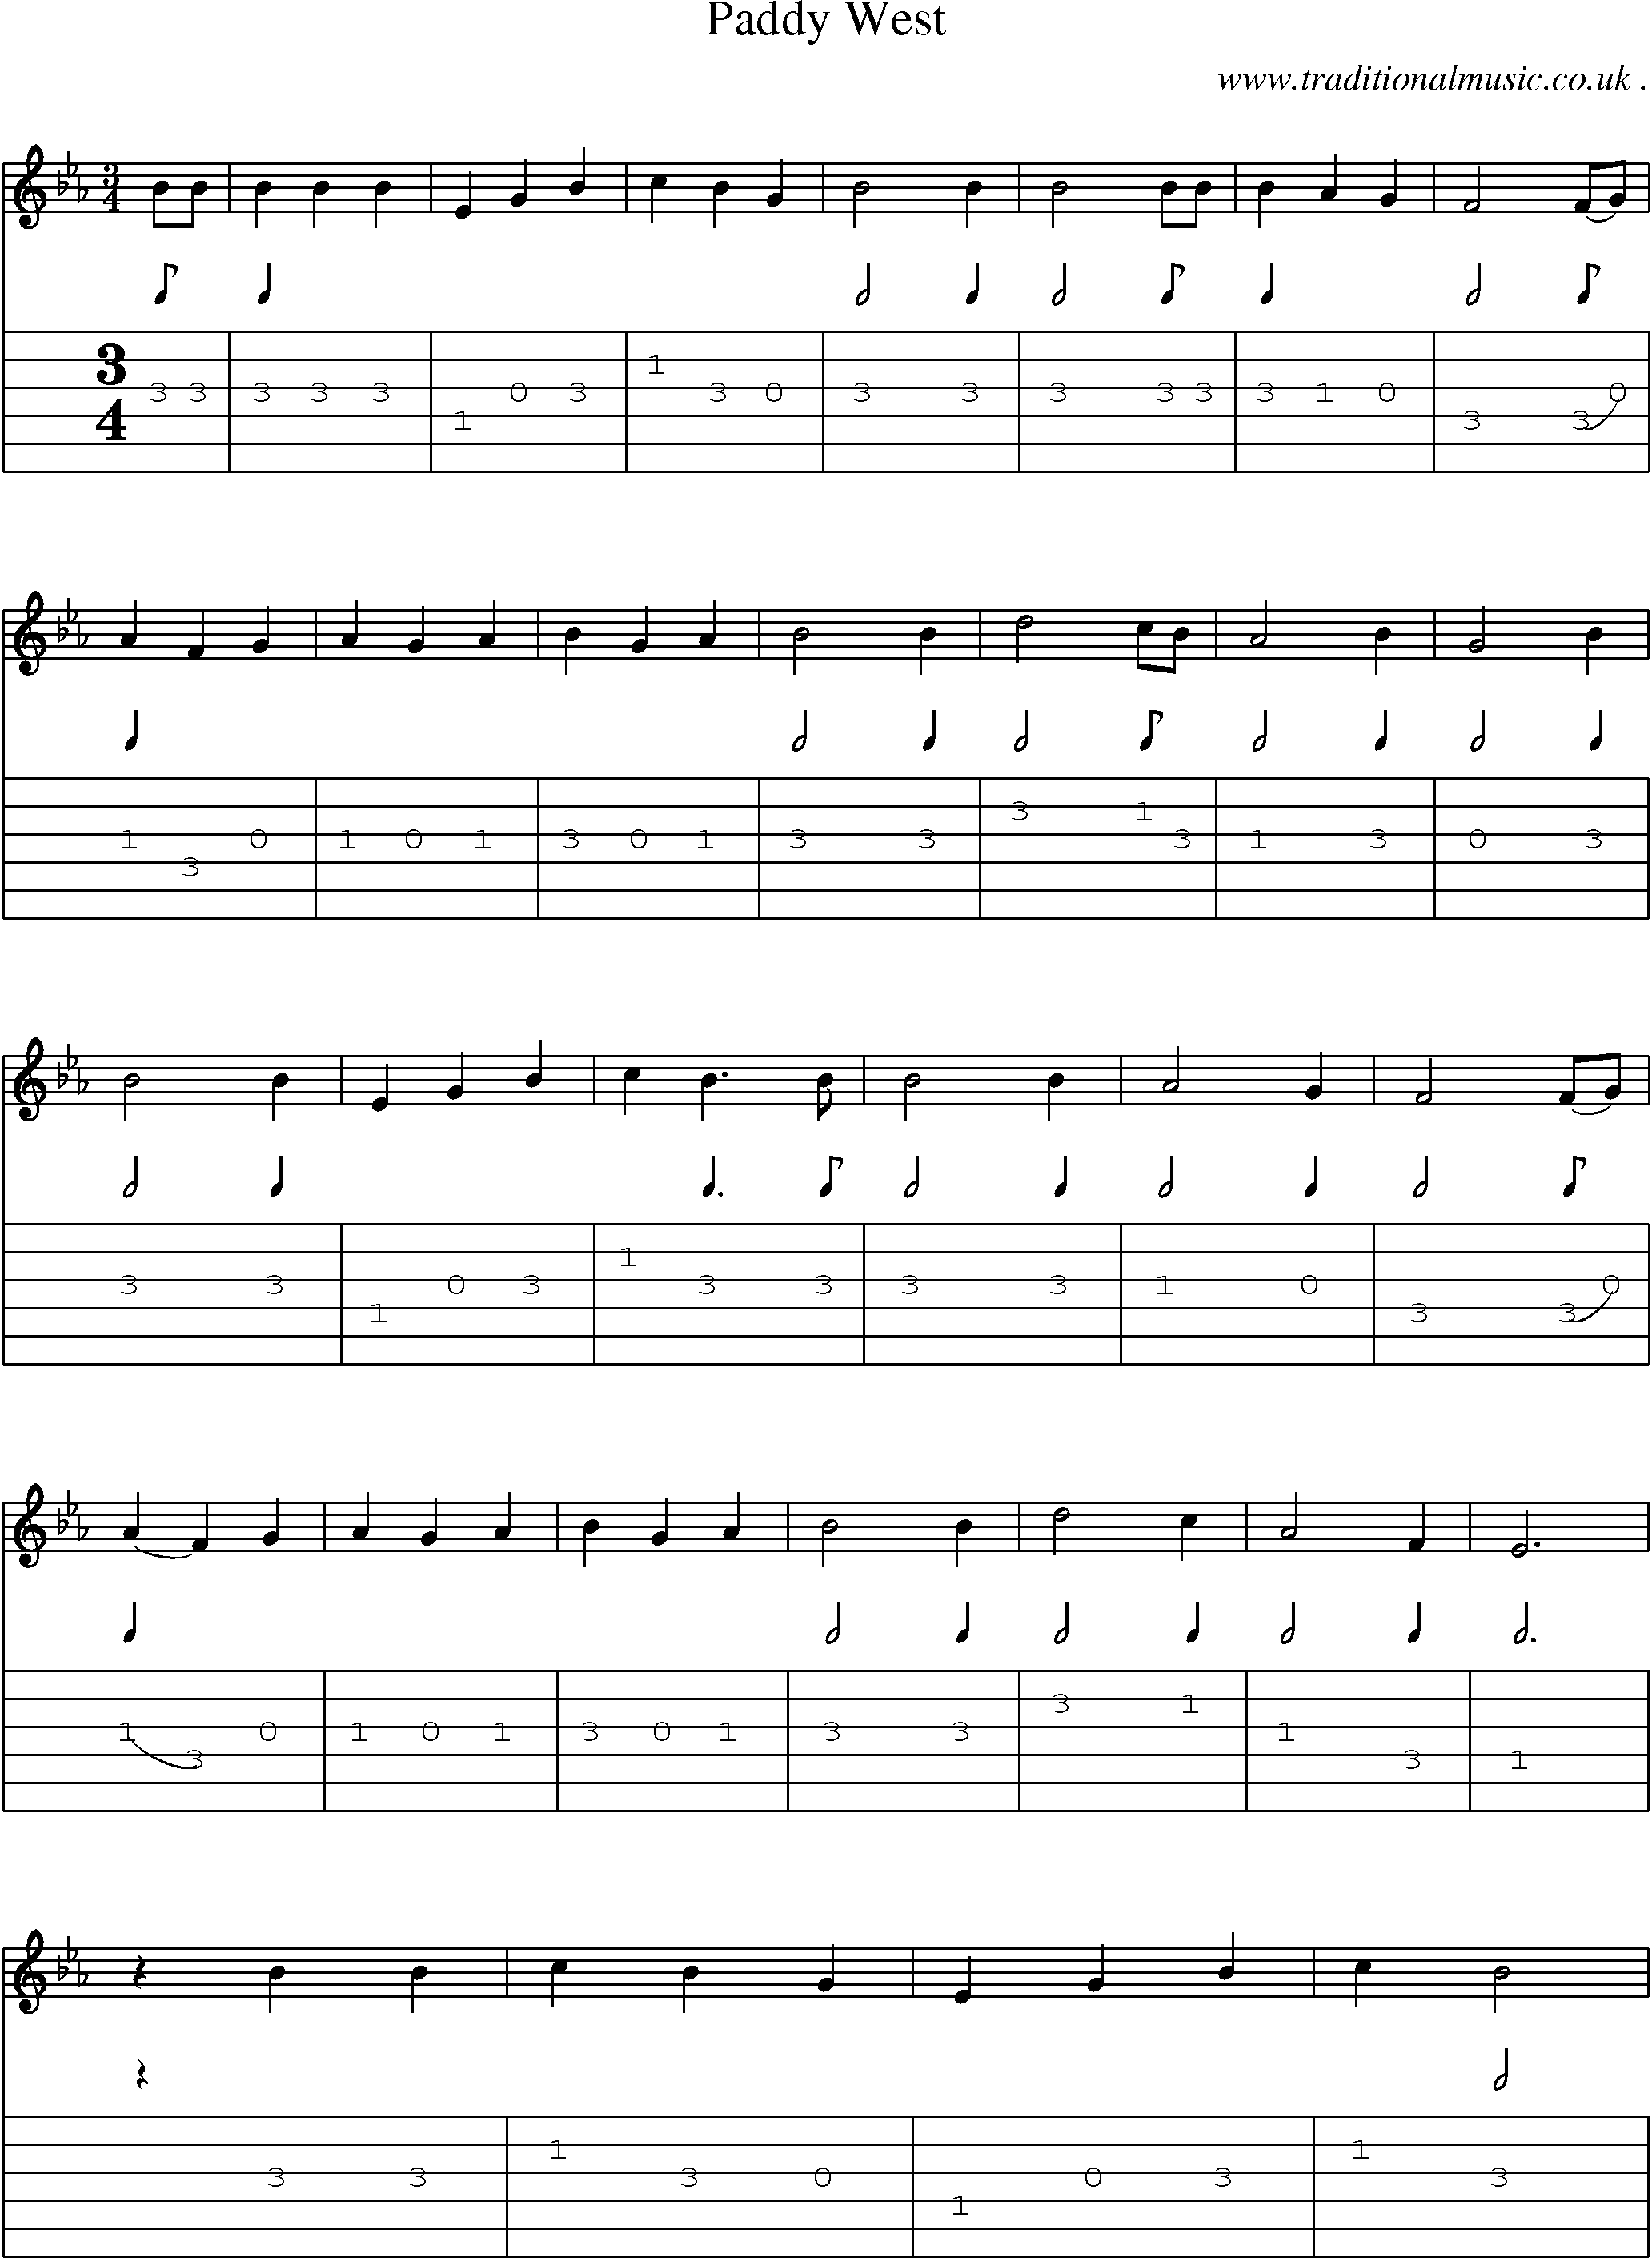 Sheet-Music and Guitar Tabs for Paddy West